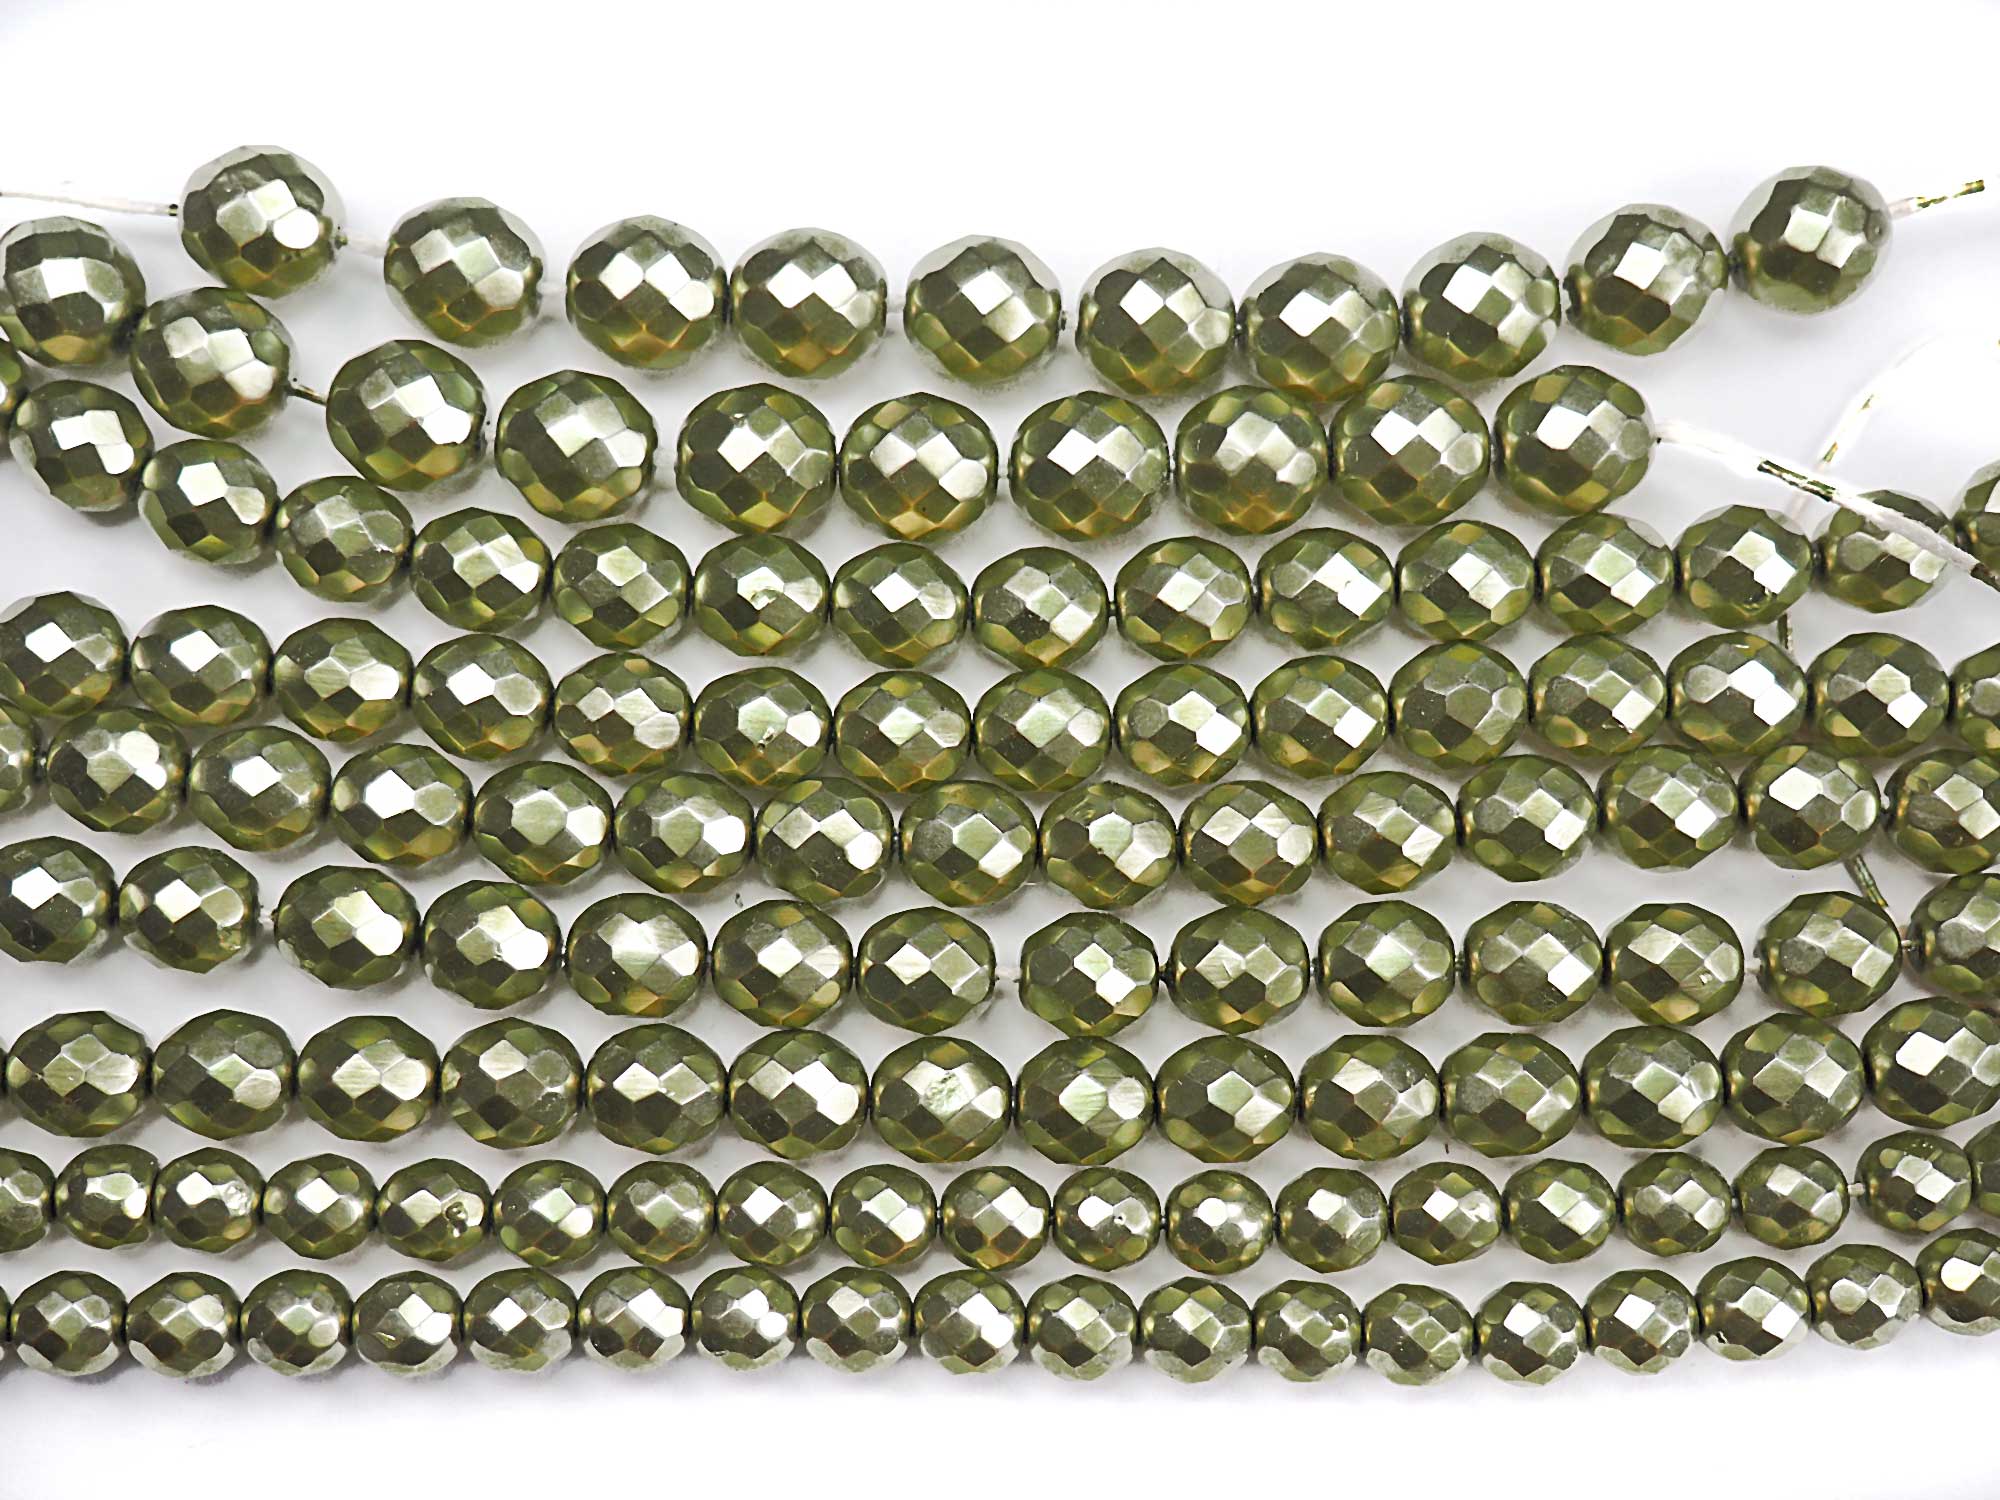 Light Green Carmen Metallic Pearl, Czech Fire Polished Round Faceted Glass Beads, Faceted Pearls